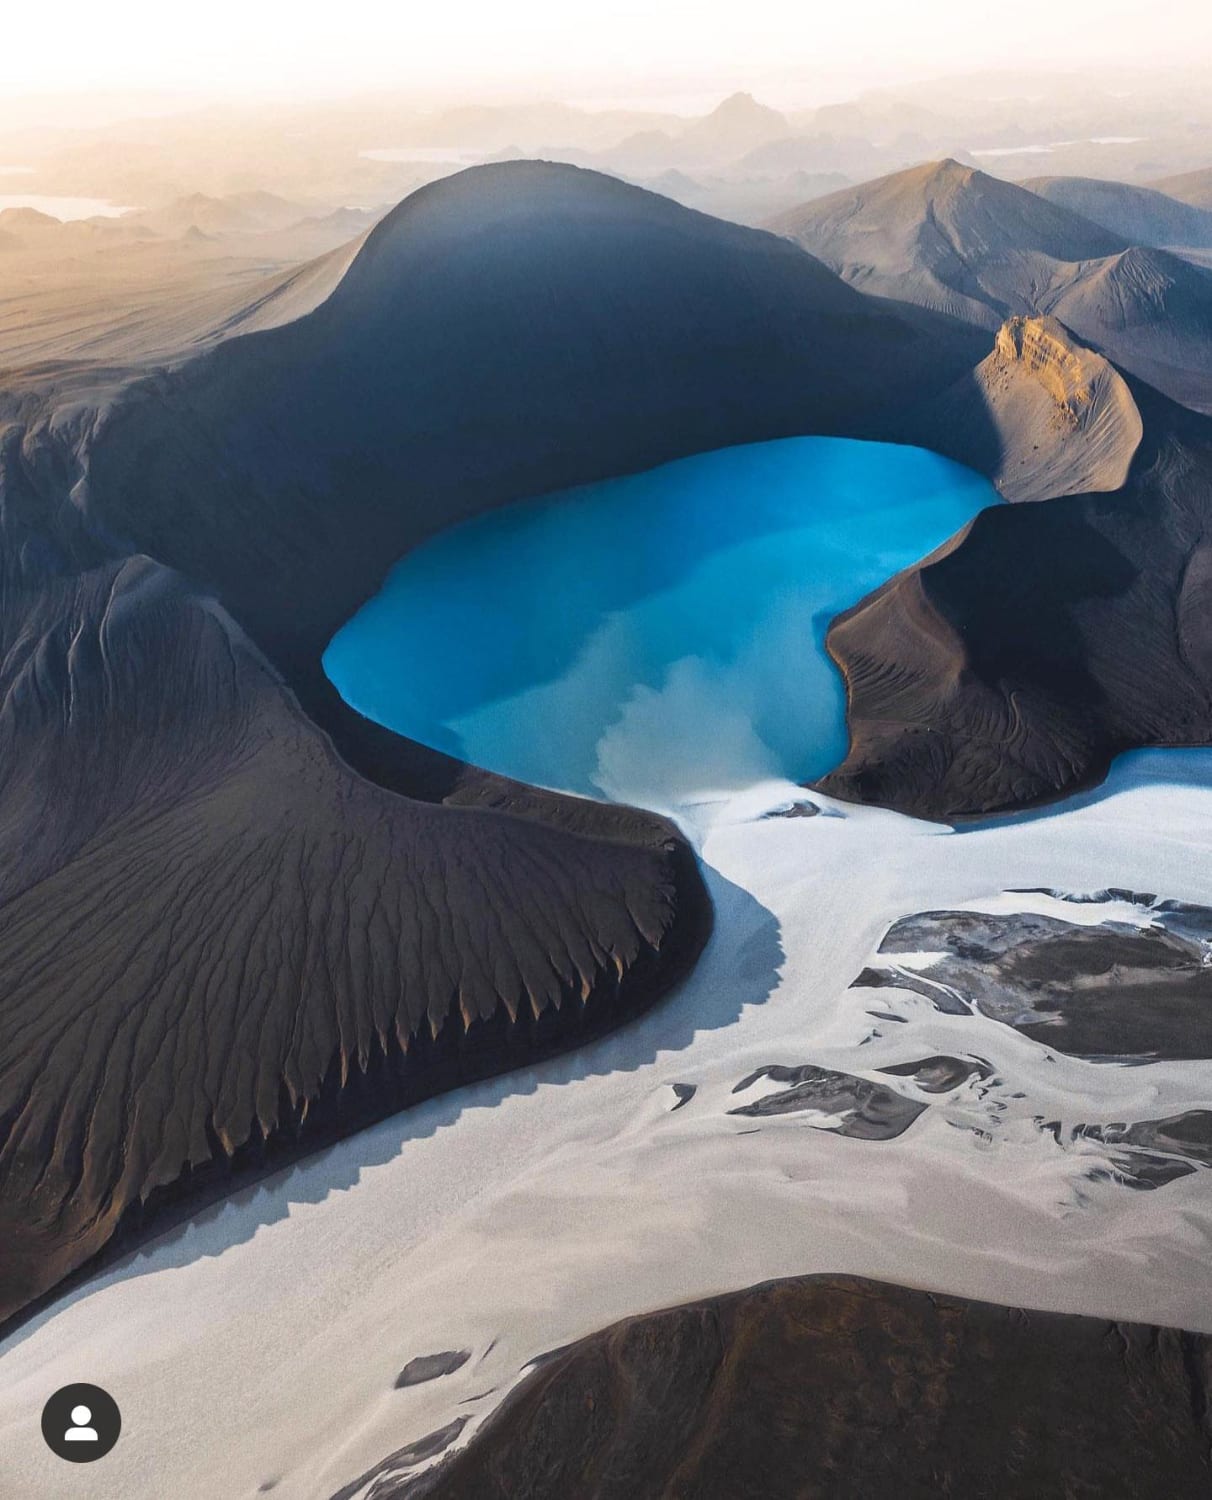 This otherworldly landscape in Iceland